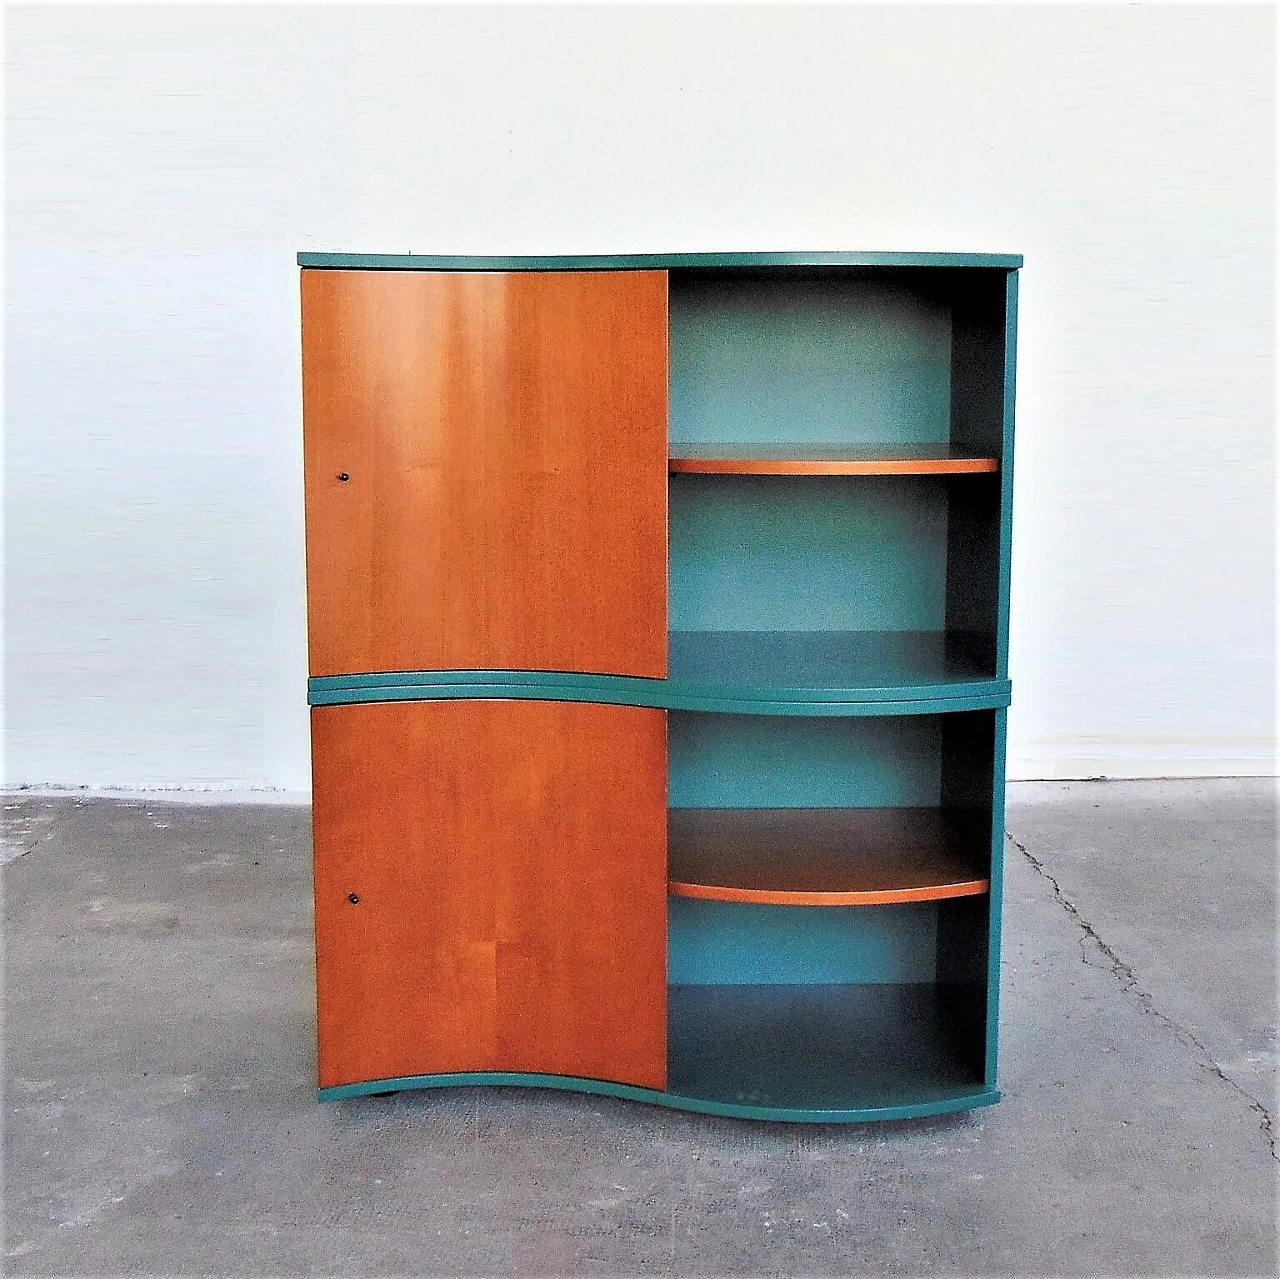 Sideboard Green Satin Lacquer, Doors in Walnut-Stained Cherry, for Roche Bobois, 1990s 1167289